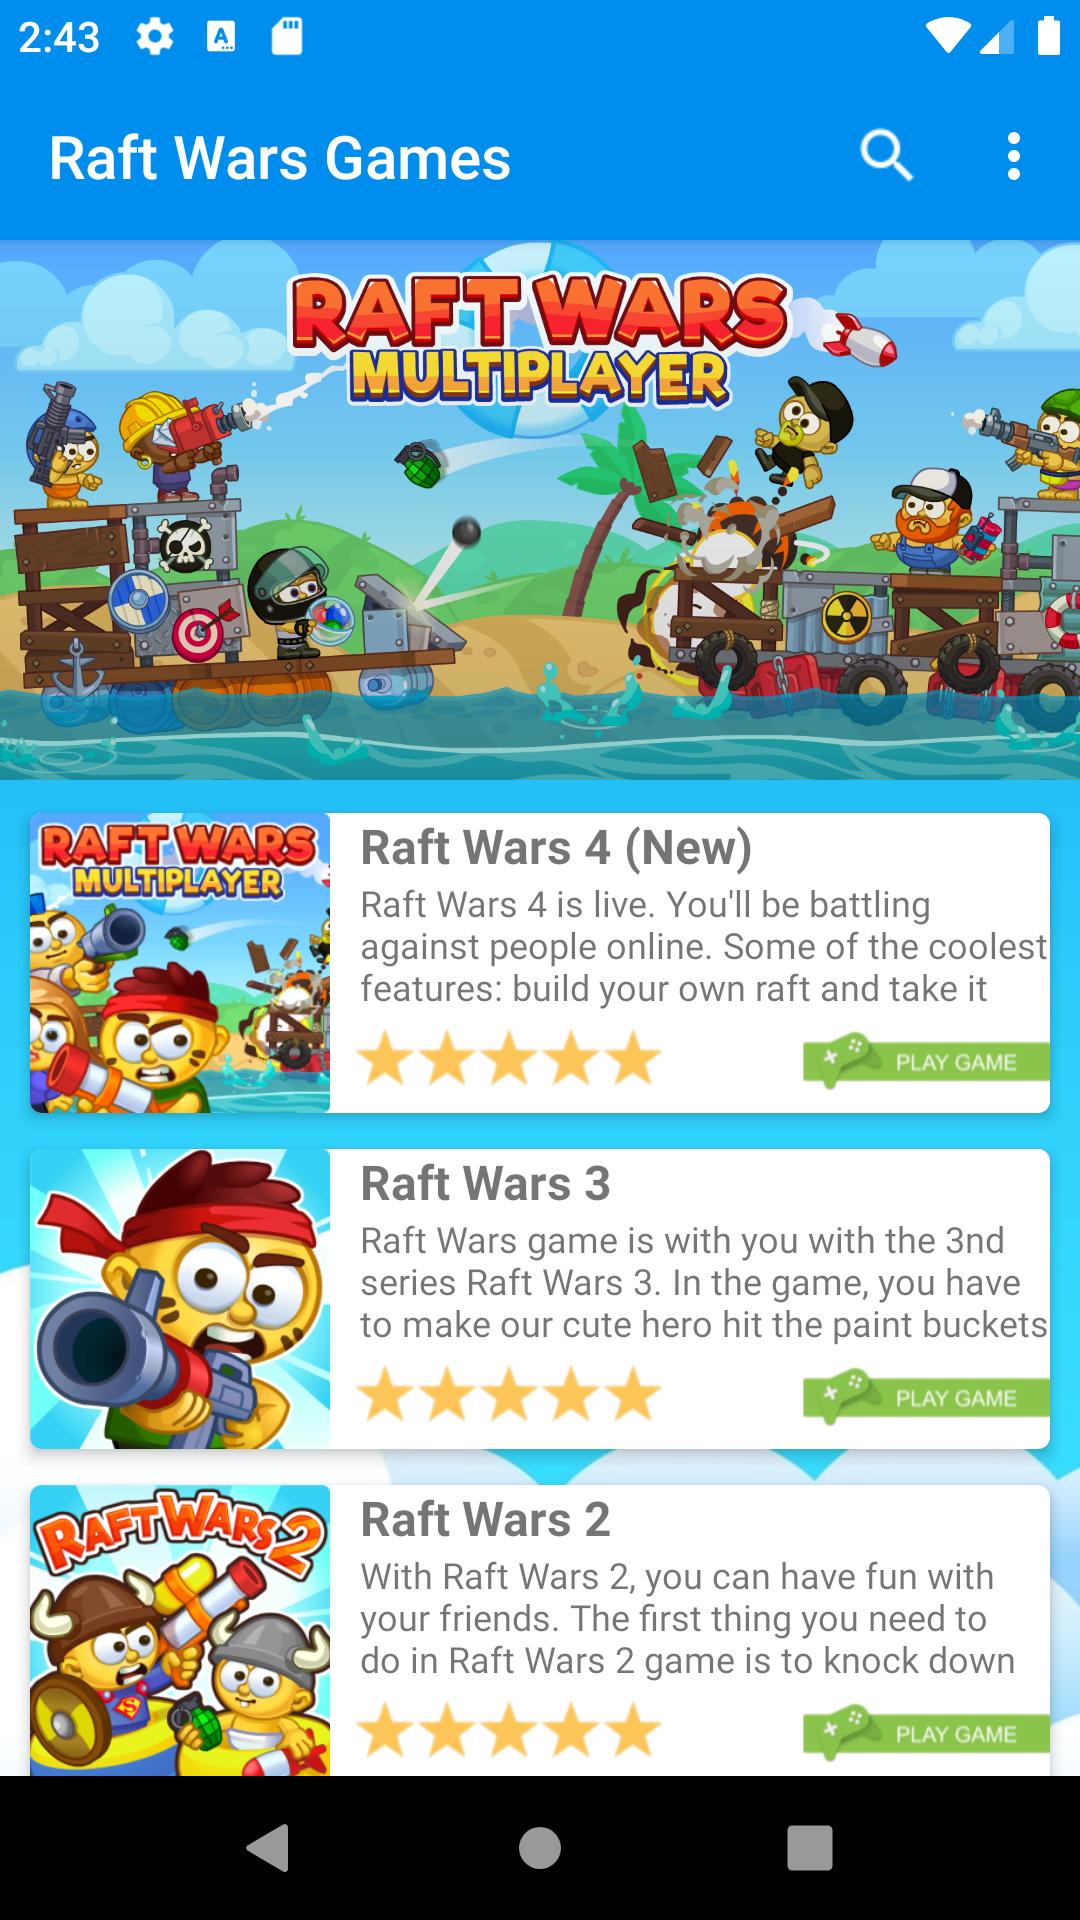 Raft Wars Games for Android - APK Download